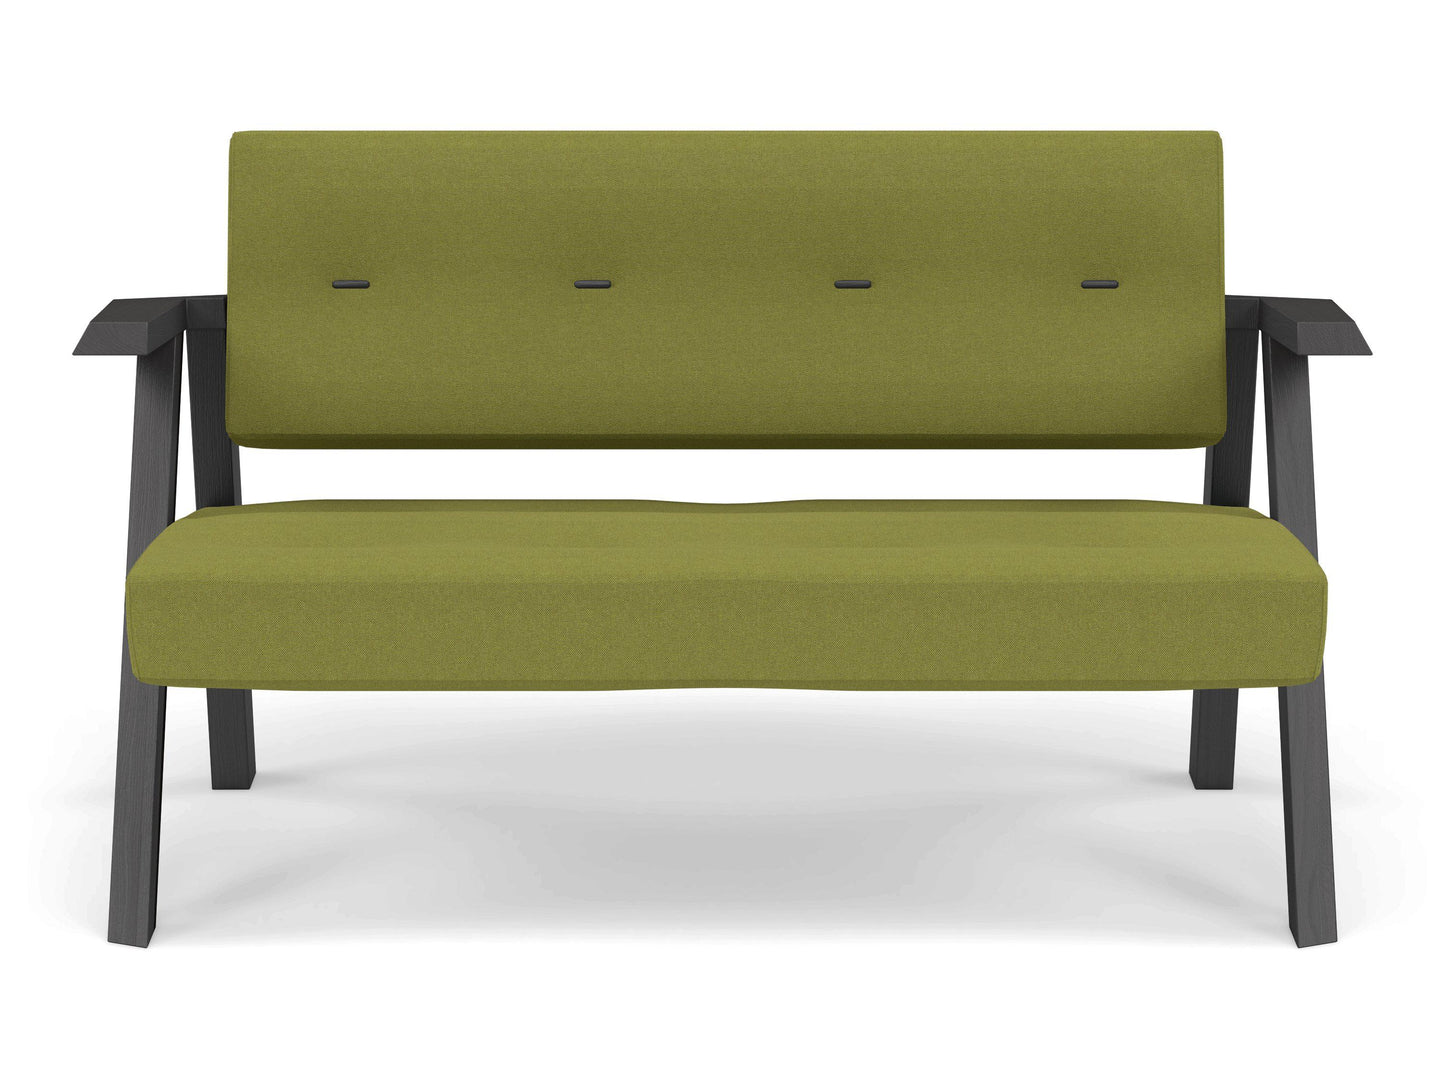 Classic Mid-century Design 2 Seater Sofa Armchair with Buttons in Lime Green Fabric-Wenge Oak-Distinct Designs (London) Ltd